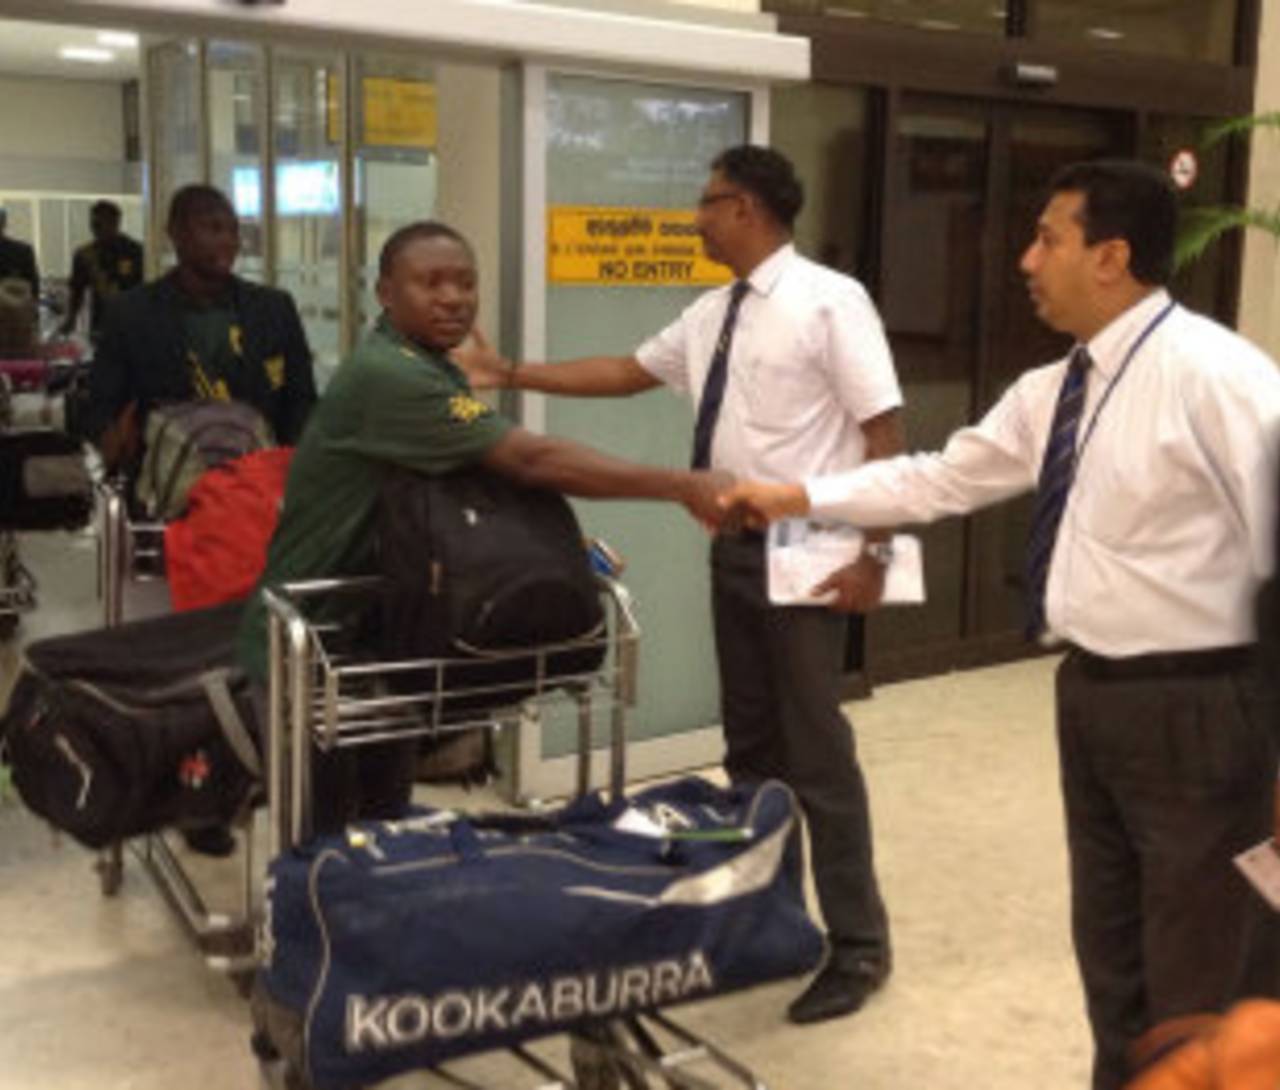 The Nigerian team is welcomed at Colombo airport, February 24, 2014